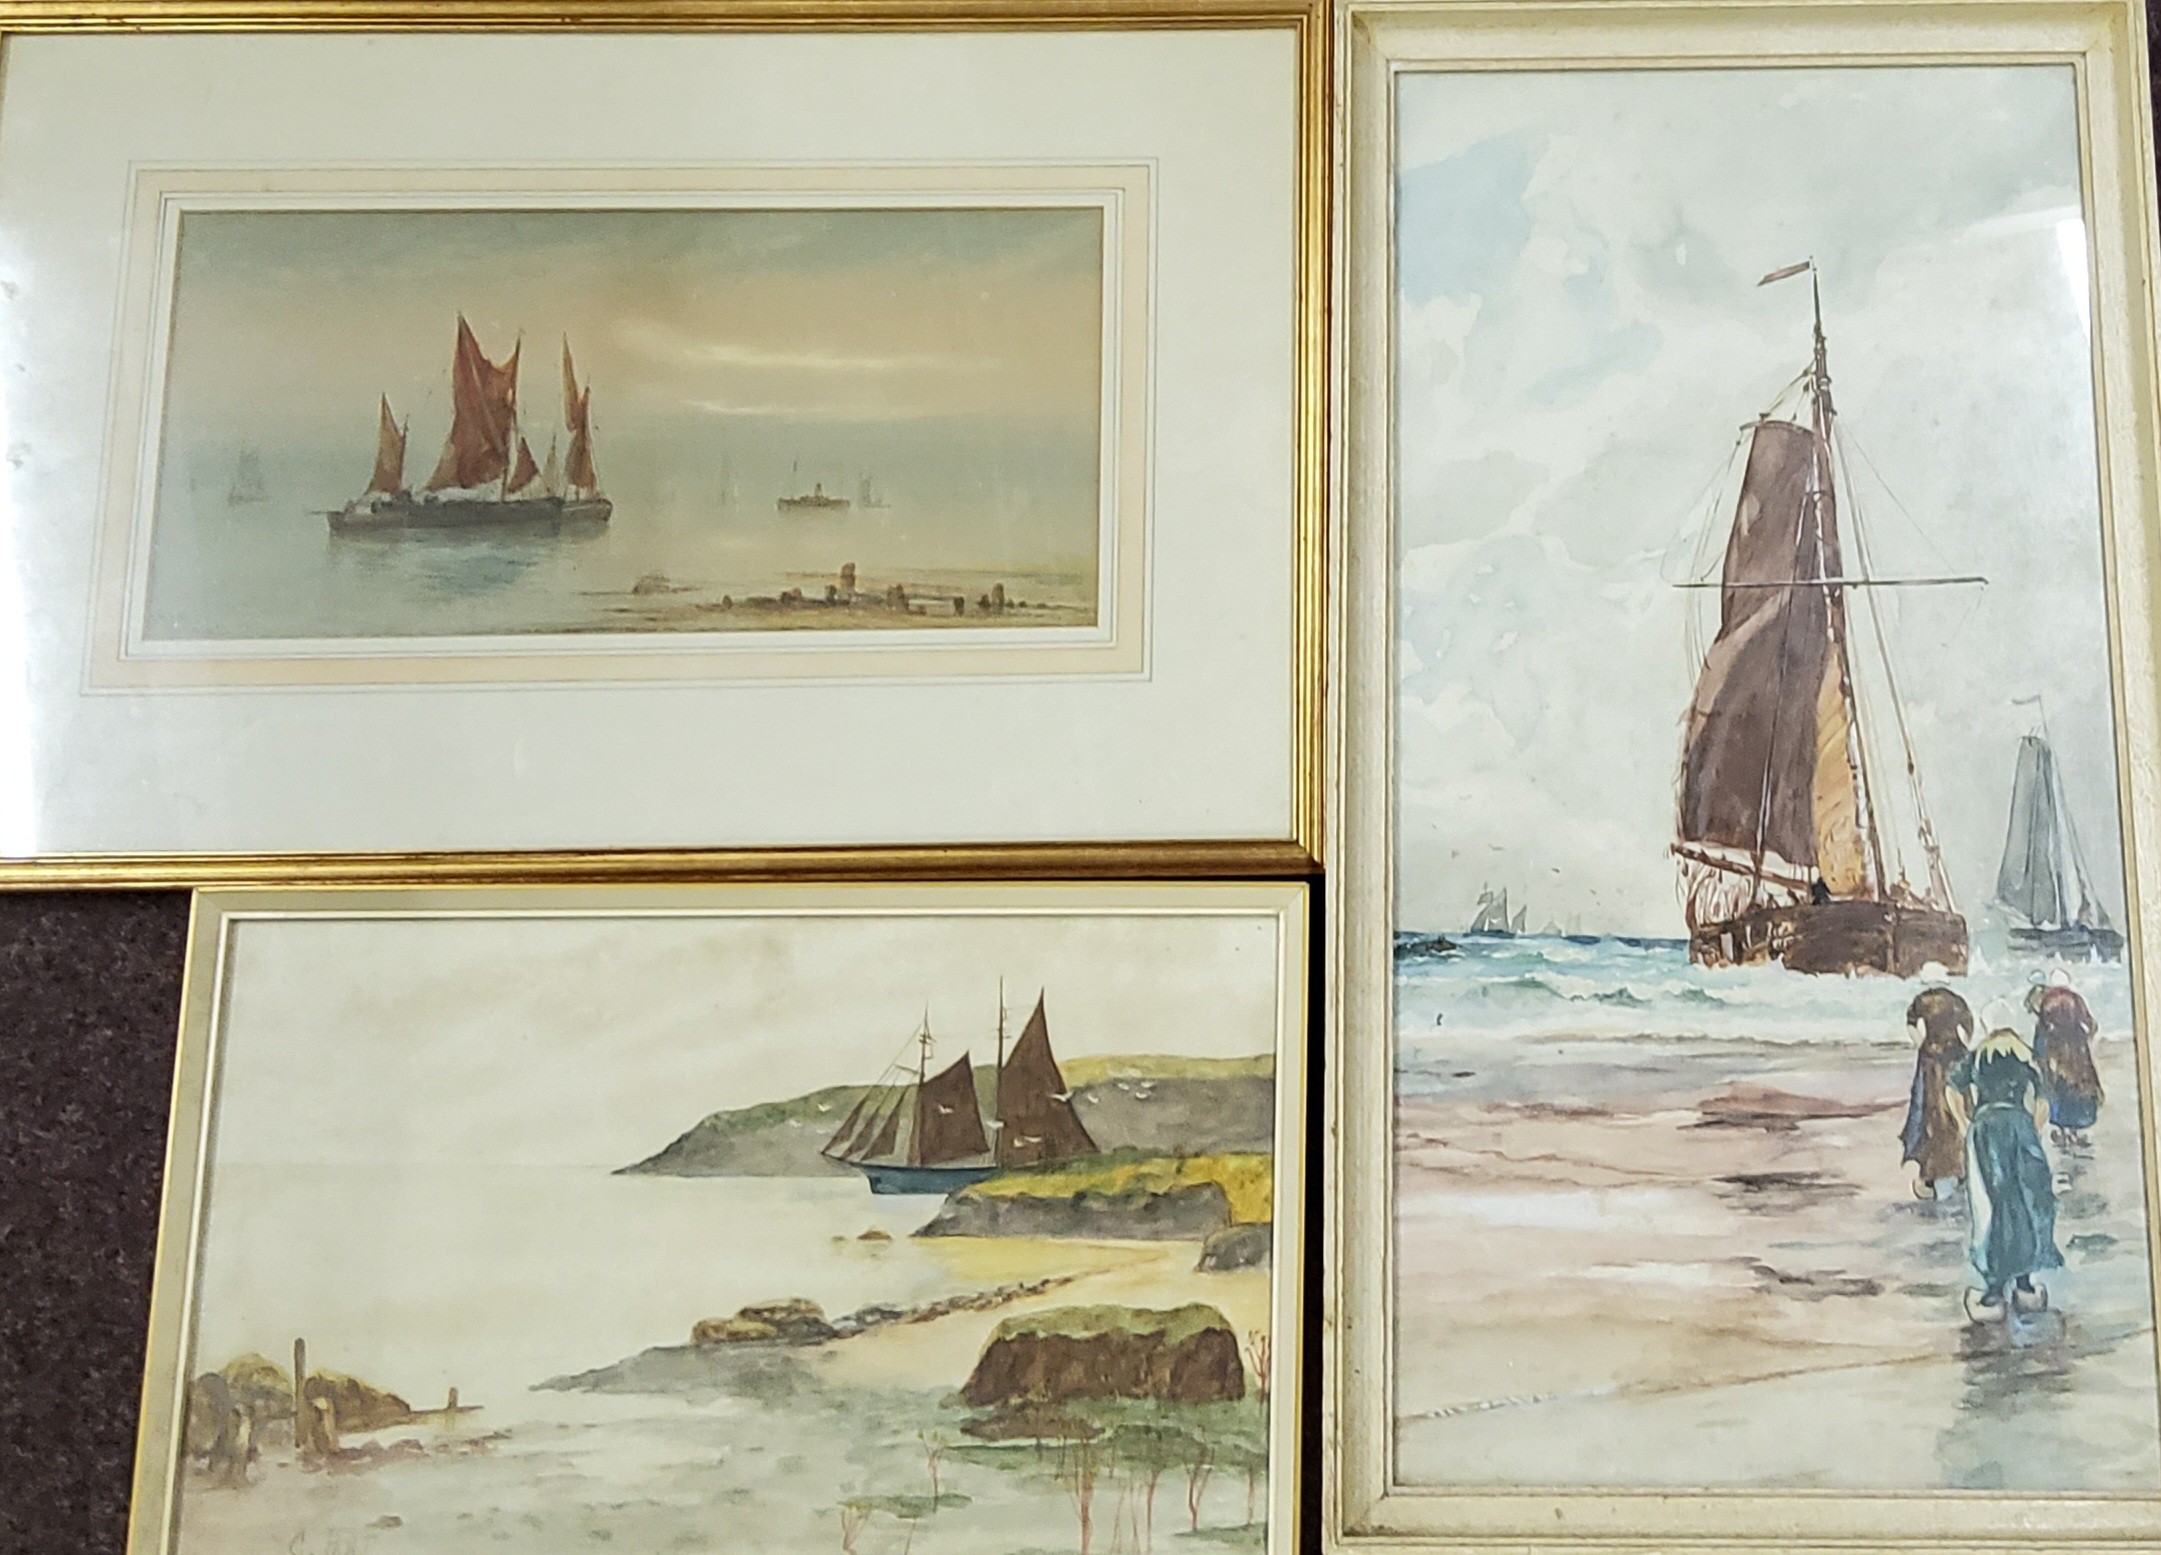 J**Mortimer, early 20th century, Fishing off the Coast, signed, watercolour, 16.5cm x 34.5cm;